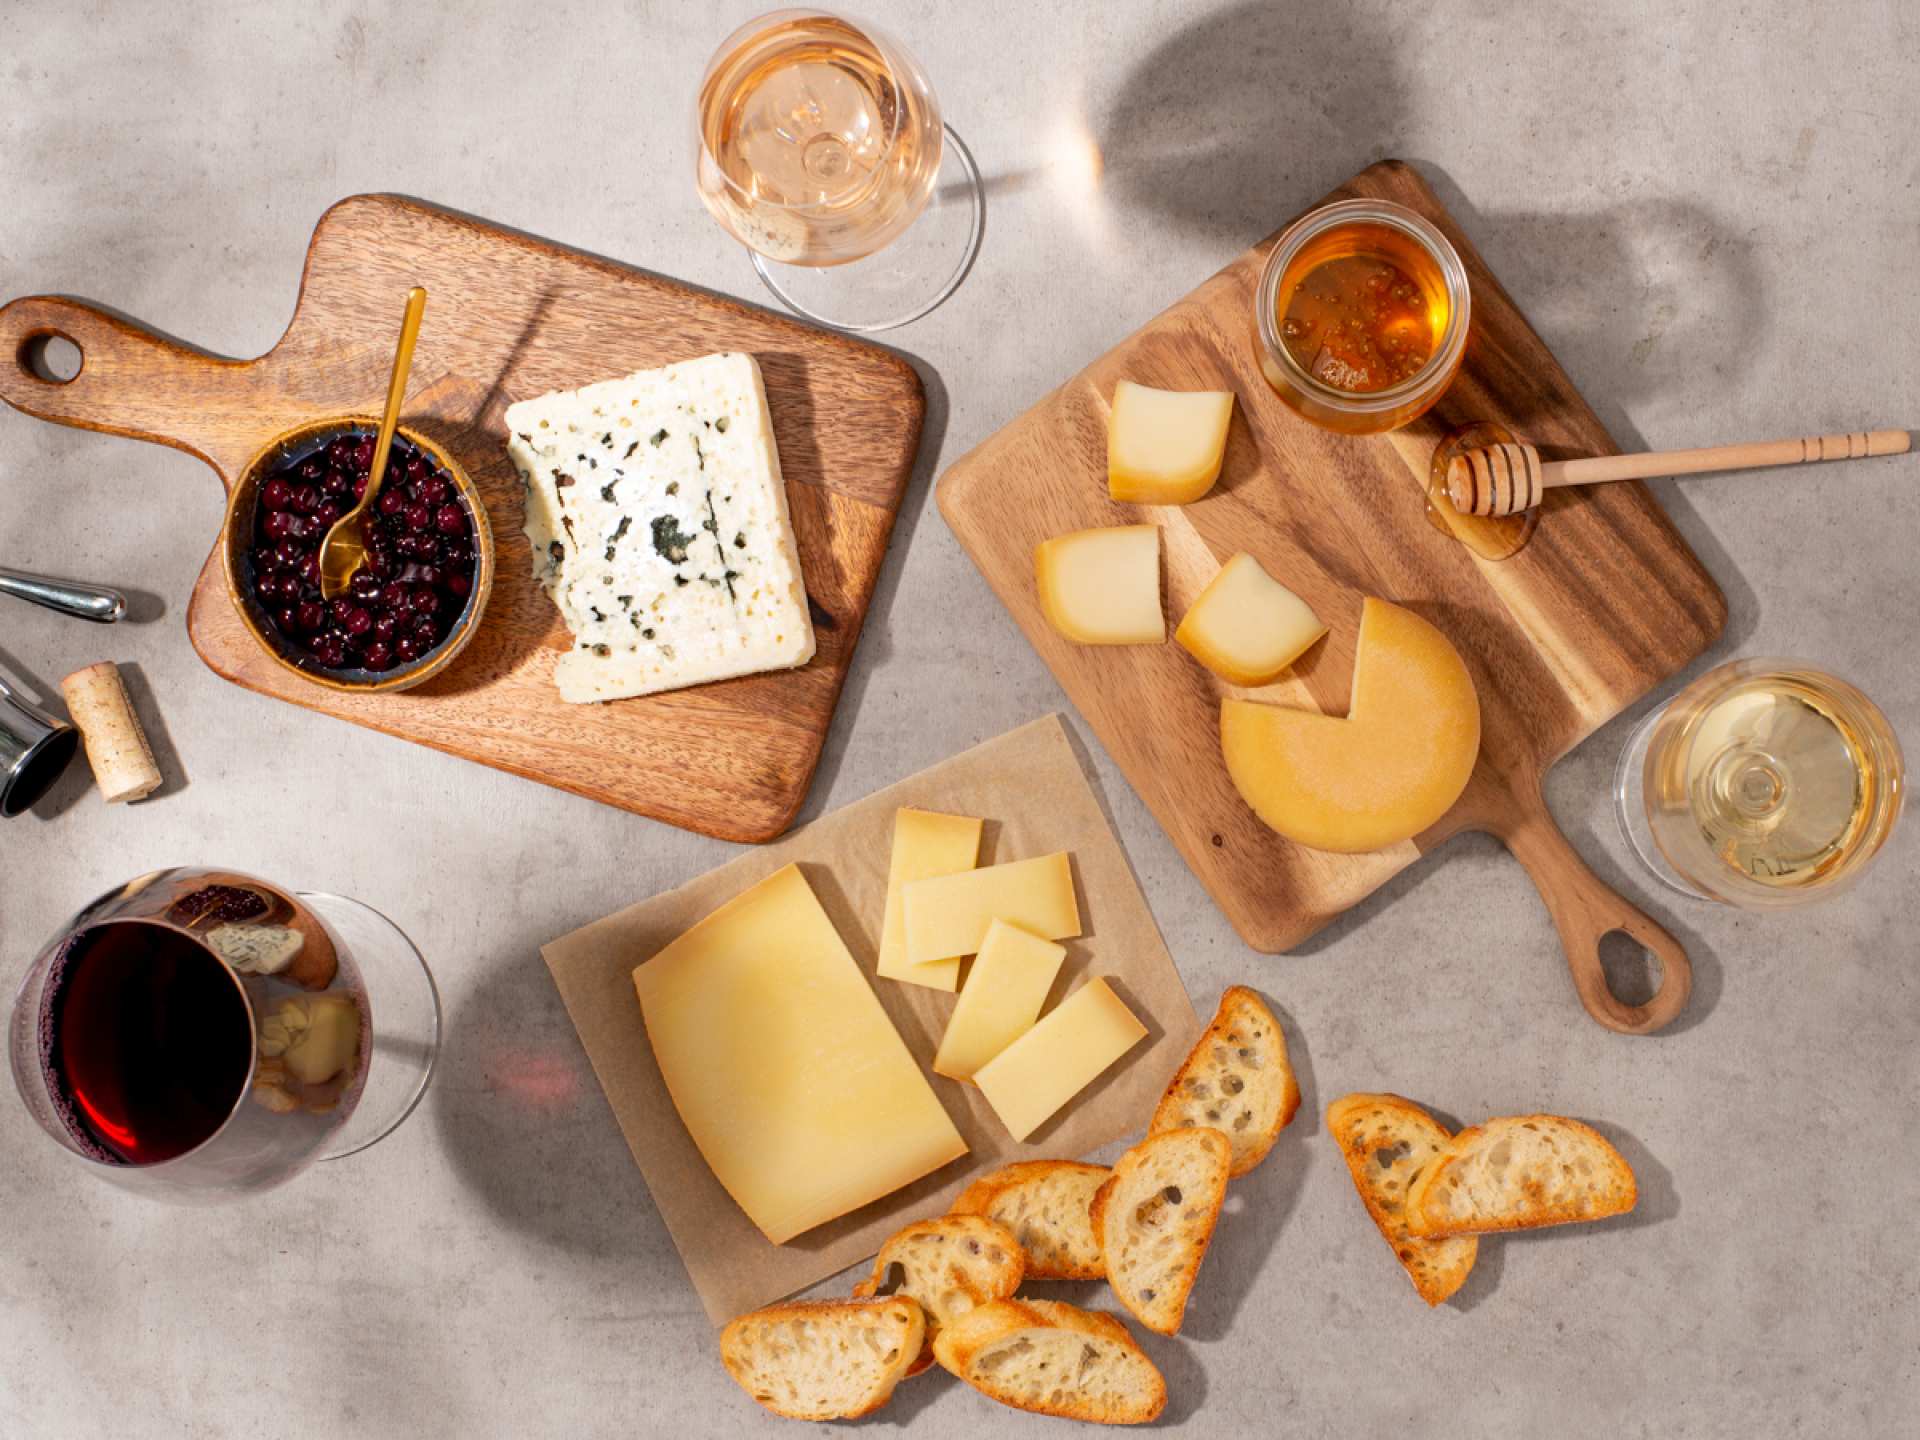 Cheeseworld online cheese shop | A spread of wine and cheese